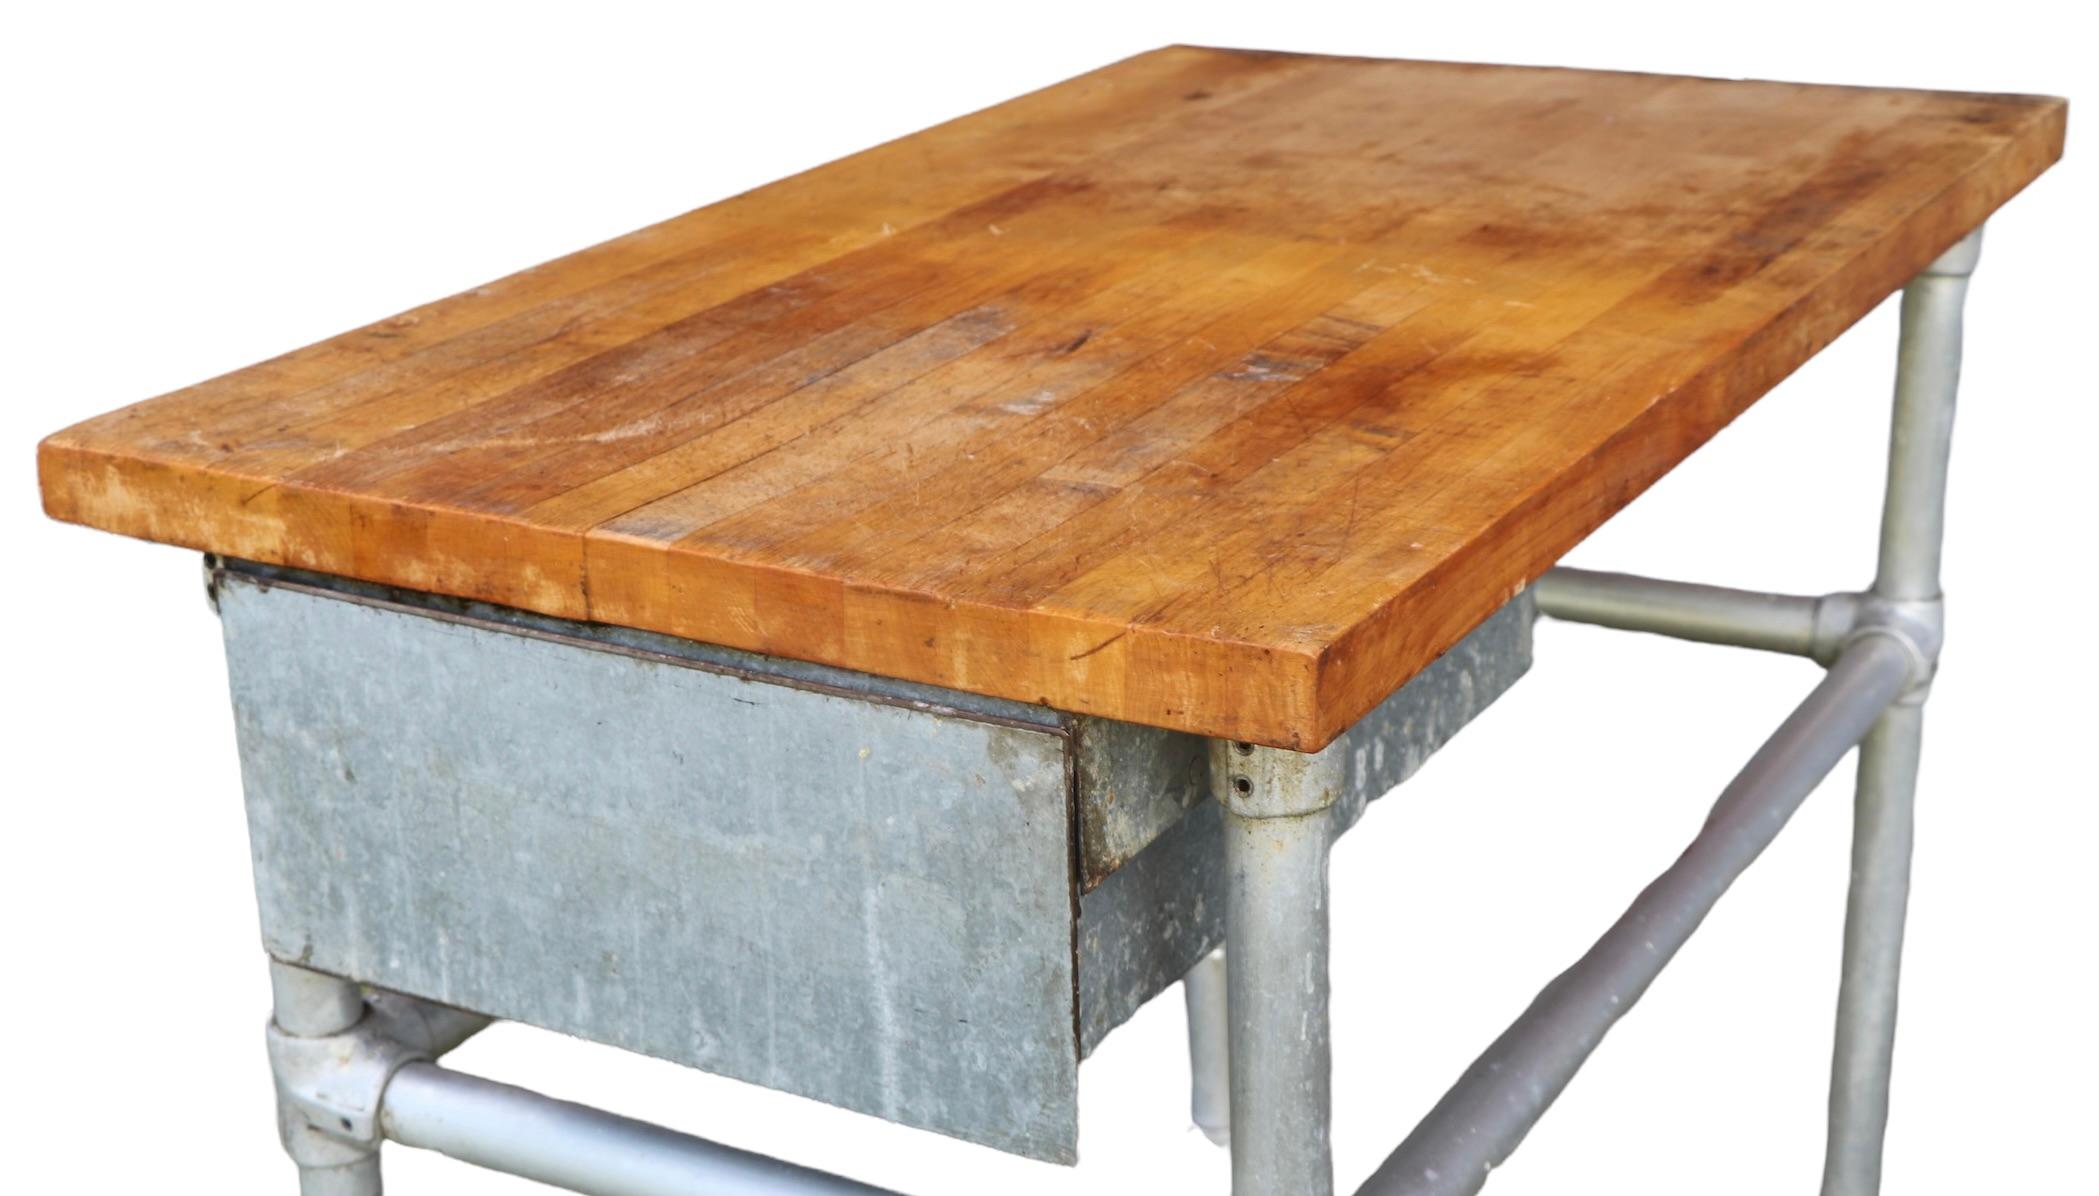 Commercial Butcher Block and Iron Work Table with Storage Drawer  7